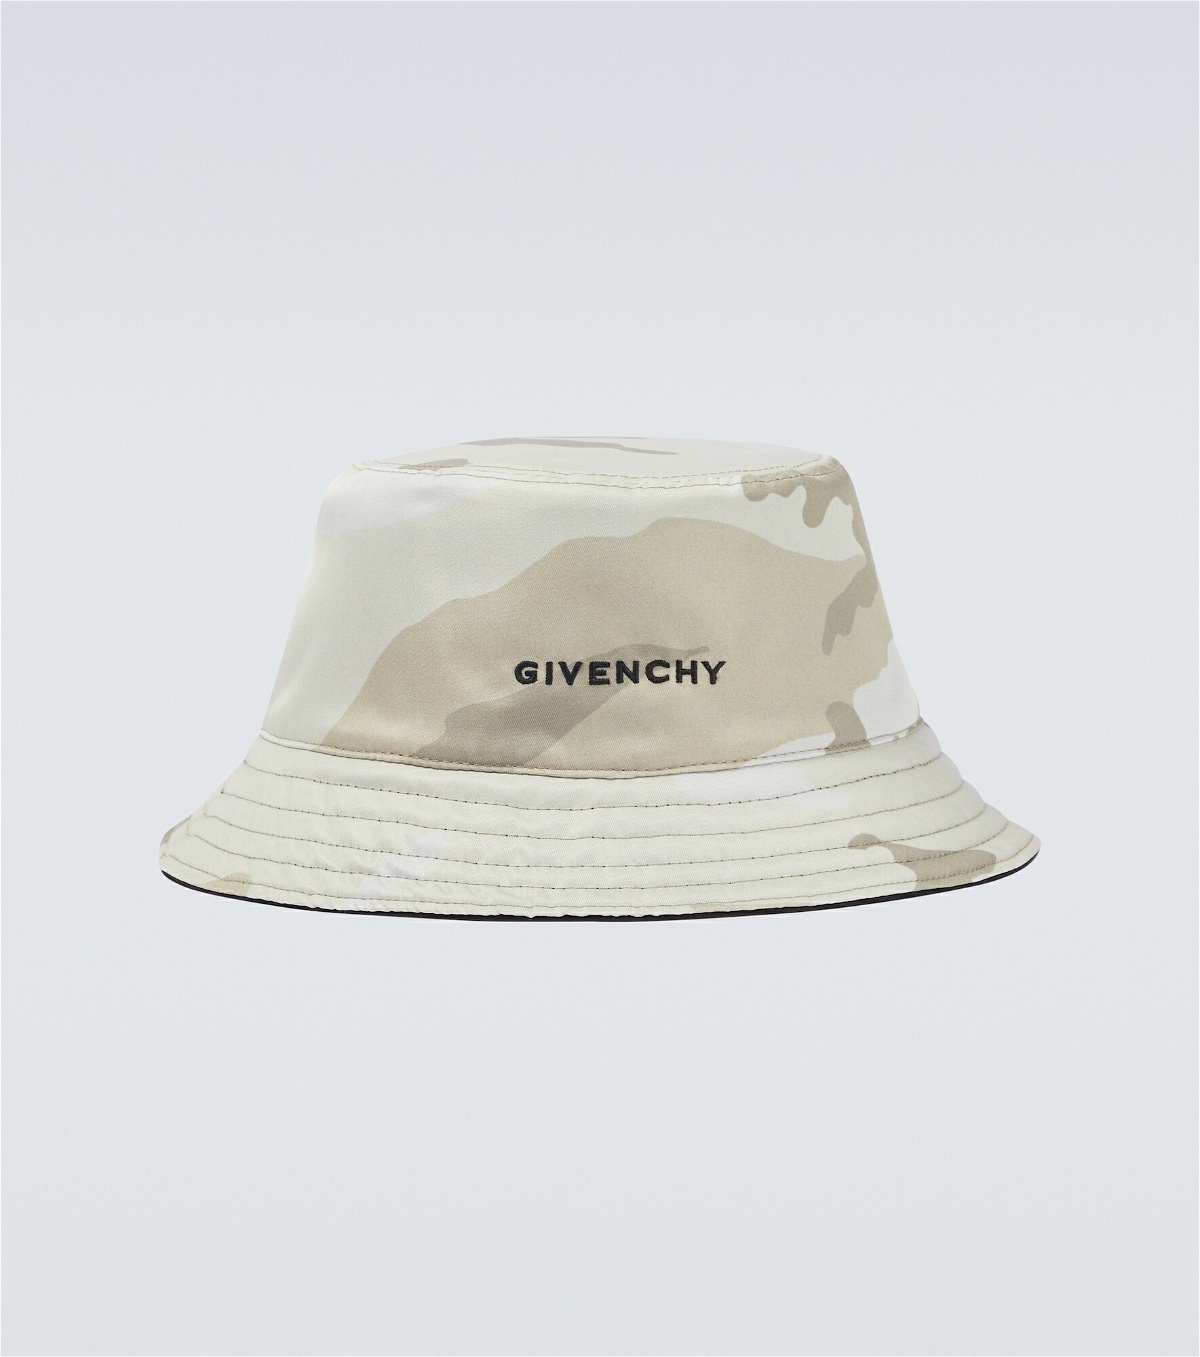 Givenchy - Reversible bucket hat Givenchy